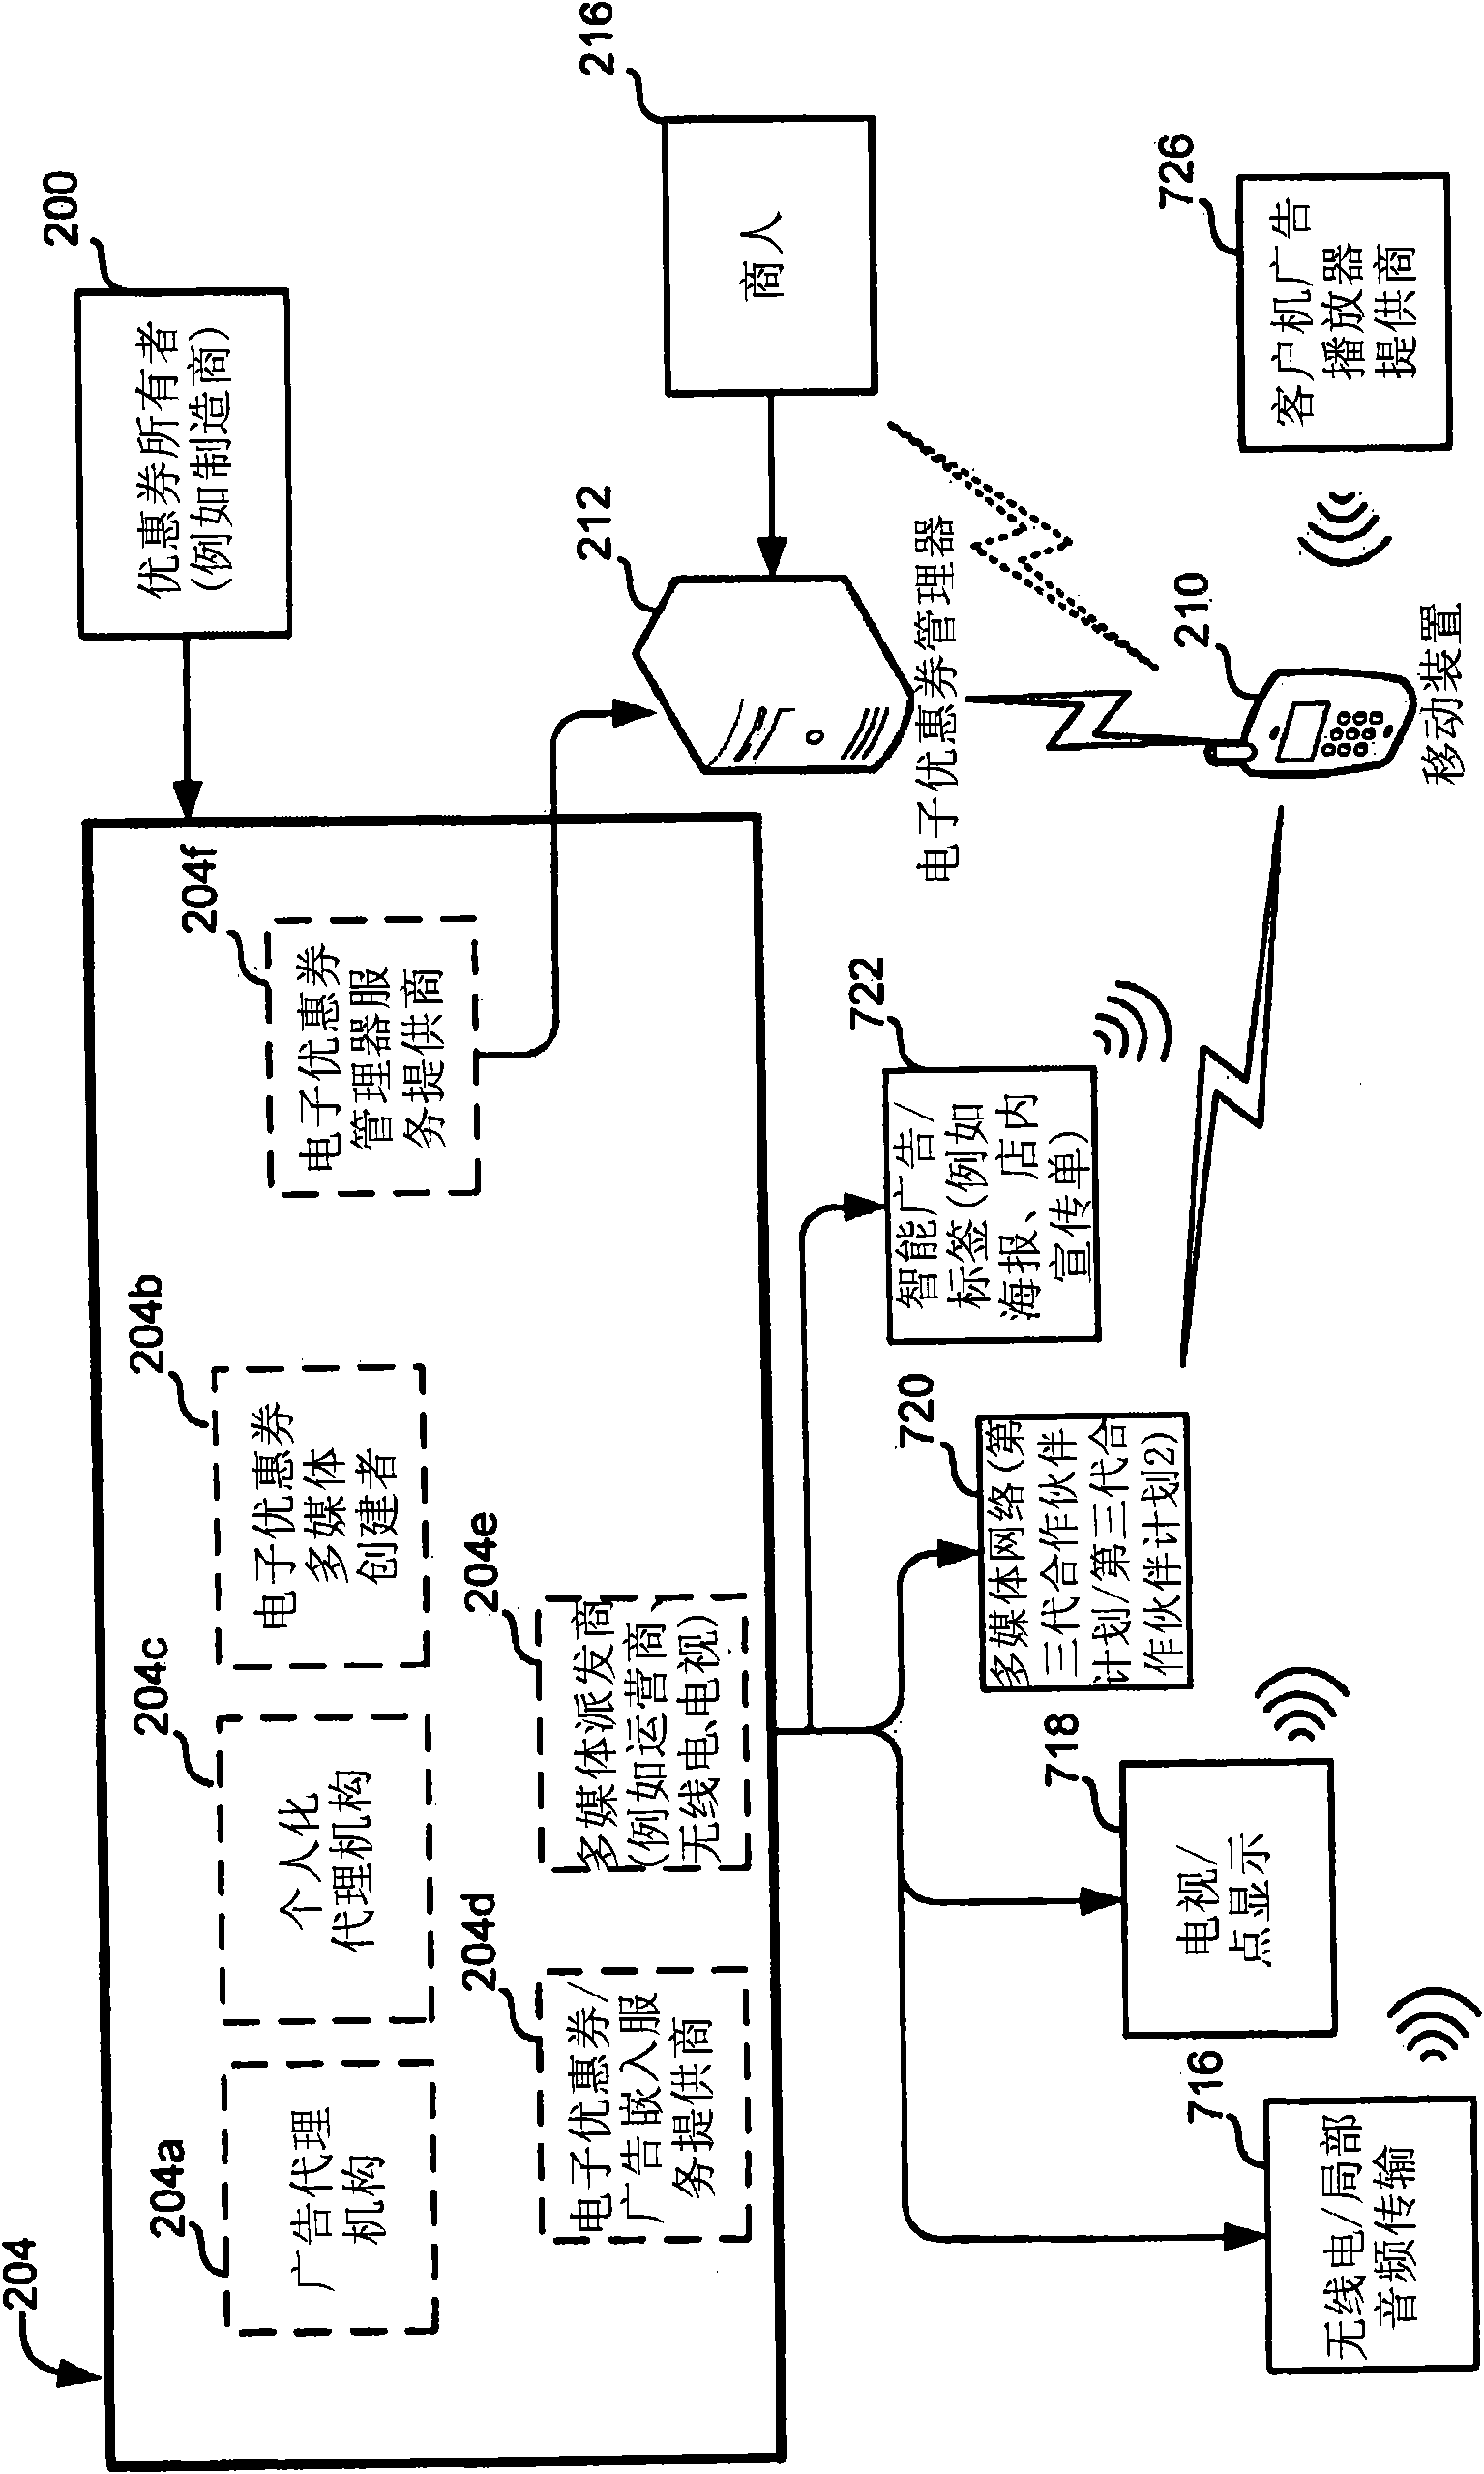 Method and apparatus for distribution and personalization of e-coupons